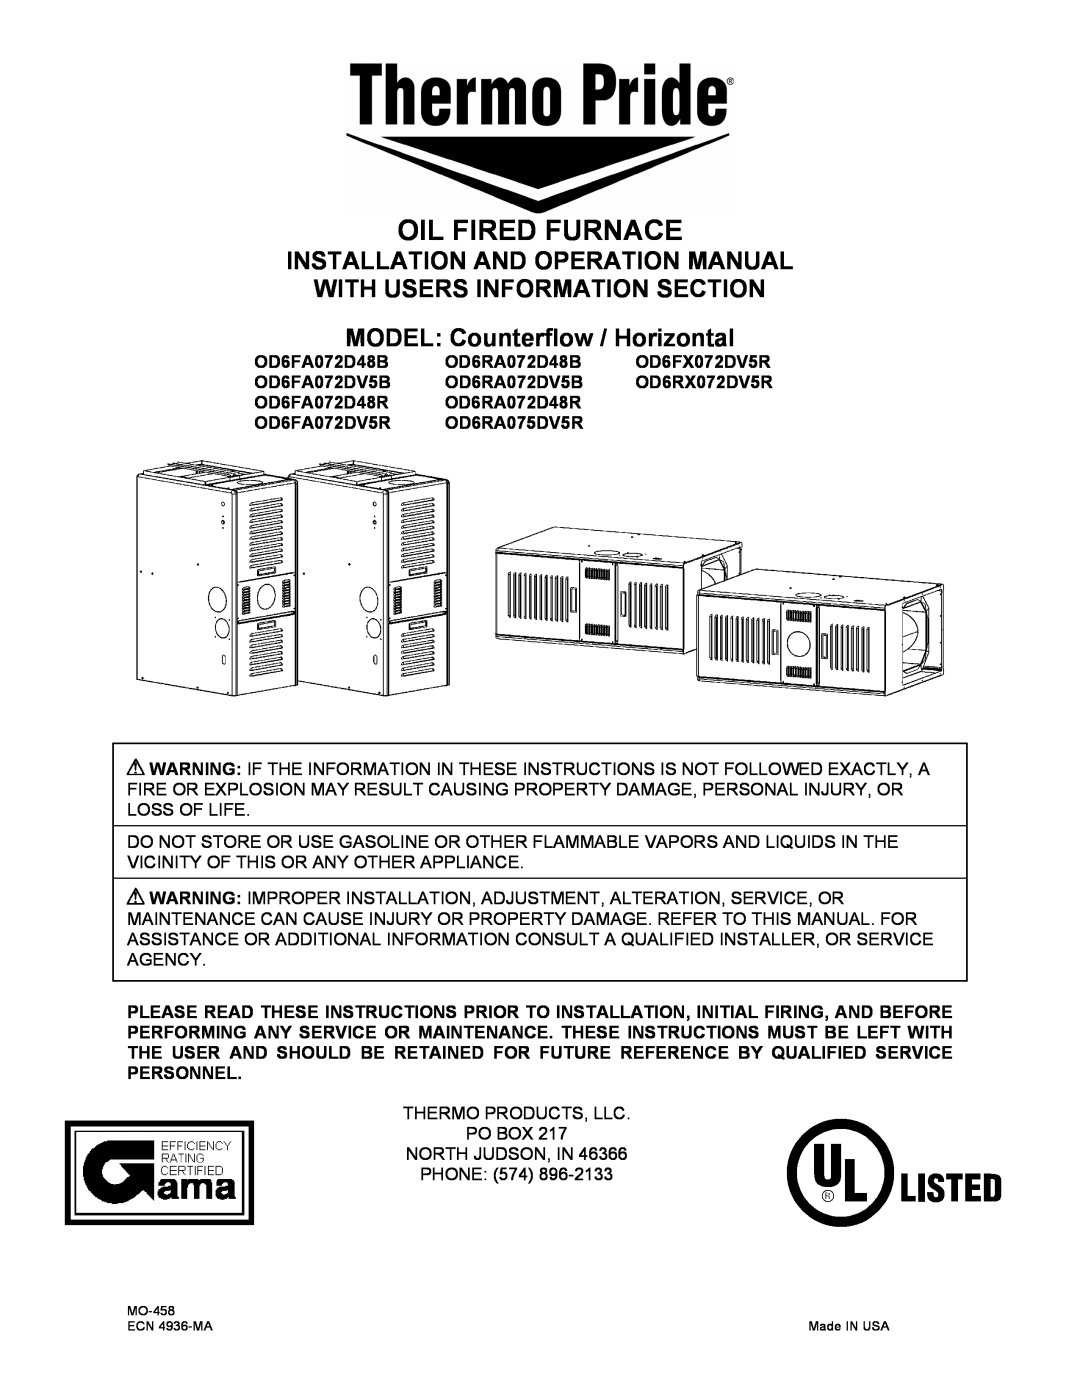 Thermo Products OD6RX072DV5R, OD6FA072DV5R, OD6RA072DV5B operation manual Oil Fired Furnace, With Users Information Section 